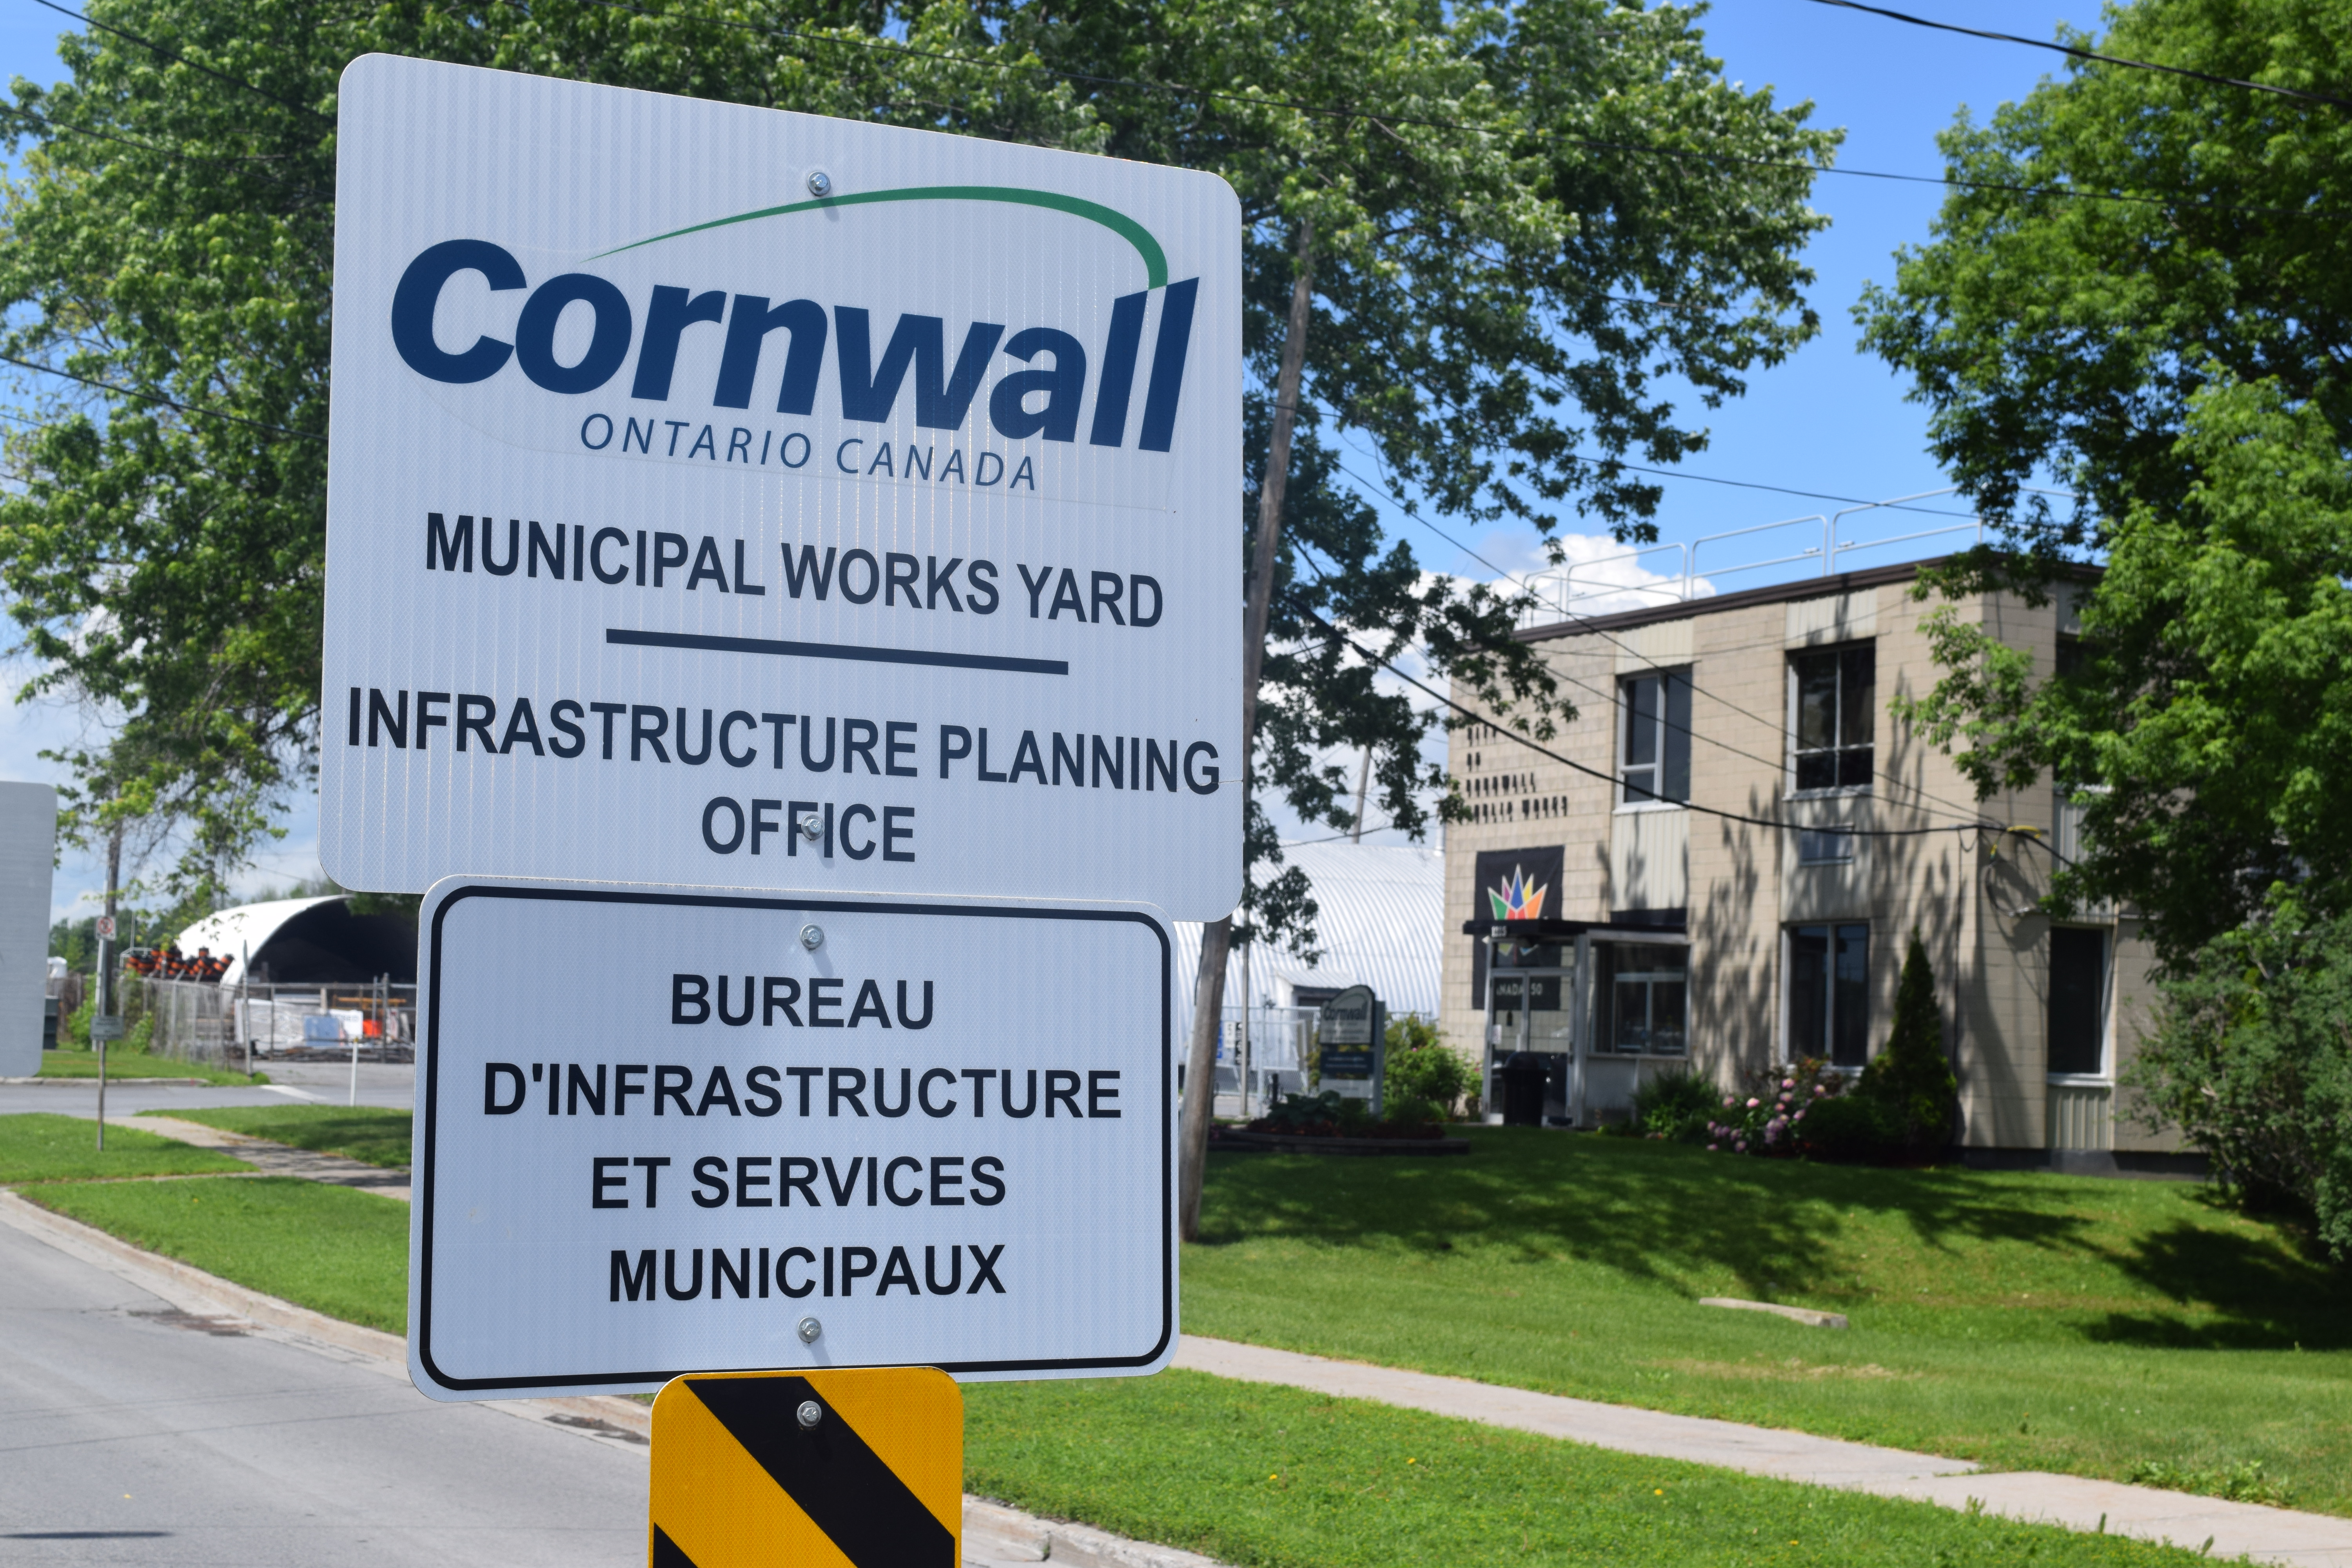 Councillor Concerned About Rising Costs Of New Municipal Yard